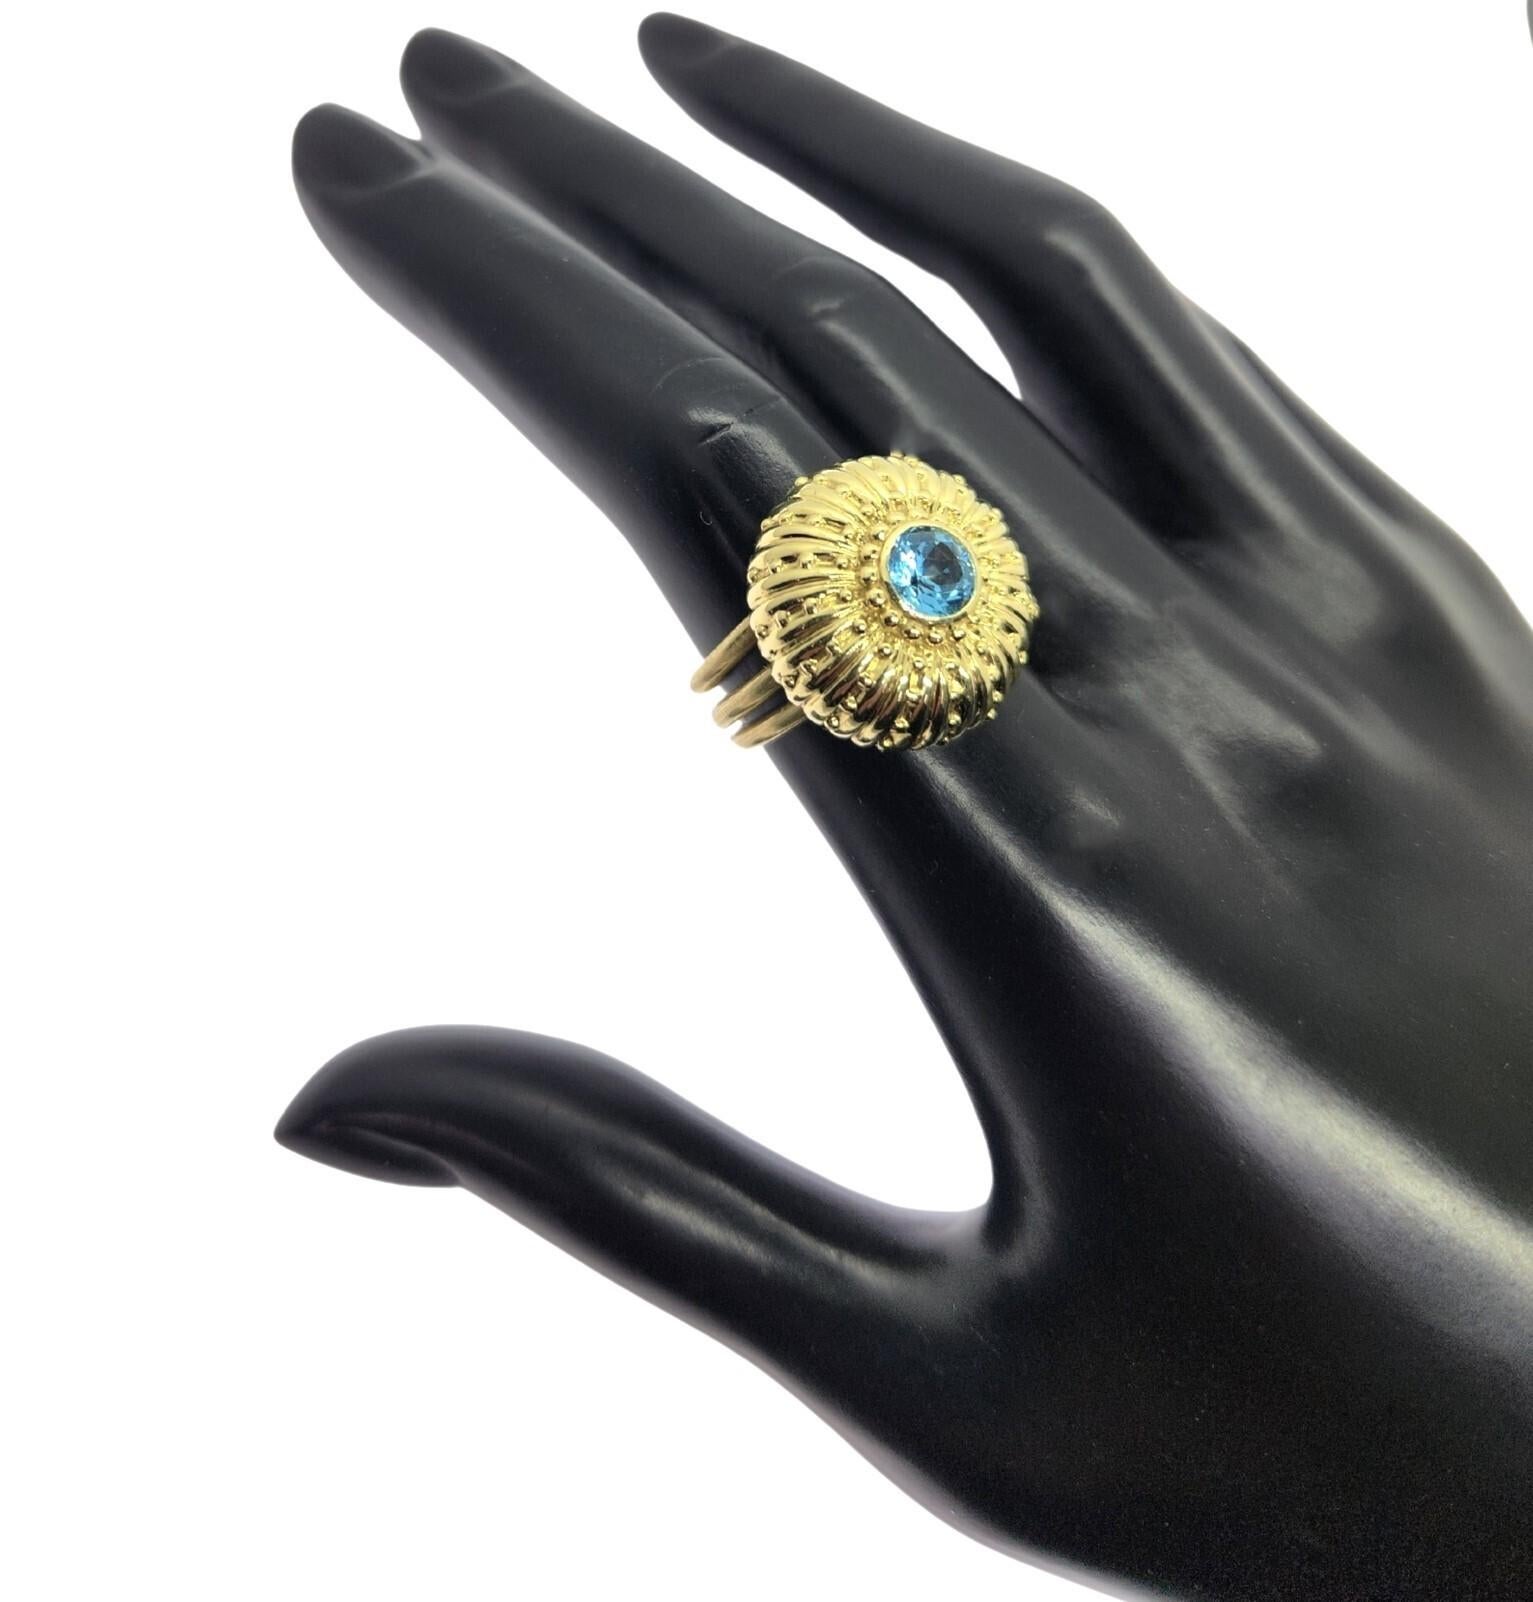 Textured Sea Urchin Necklace with Ocean Blue Topaz Center and 18K Gold Necklace In New Condition For Sale In Rutherford, NJ